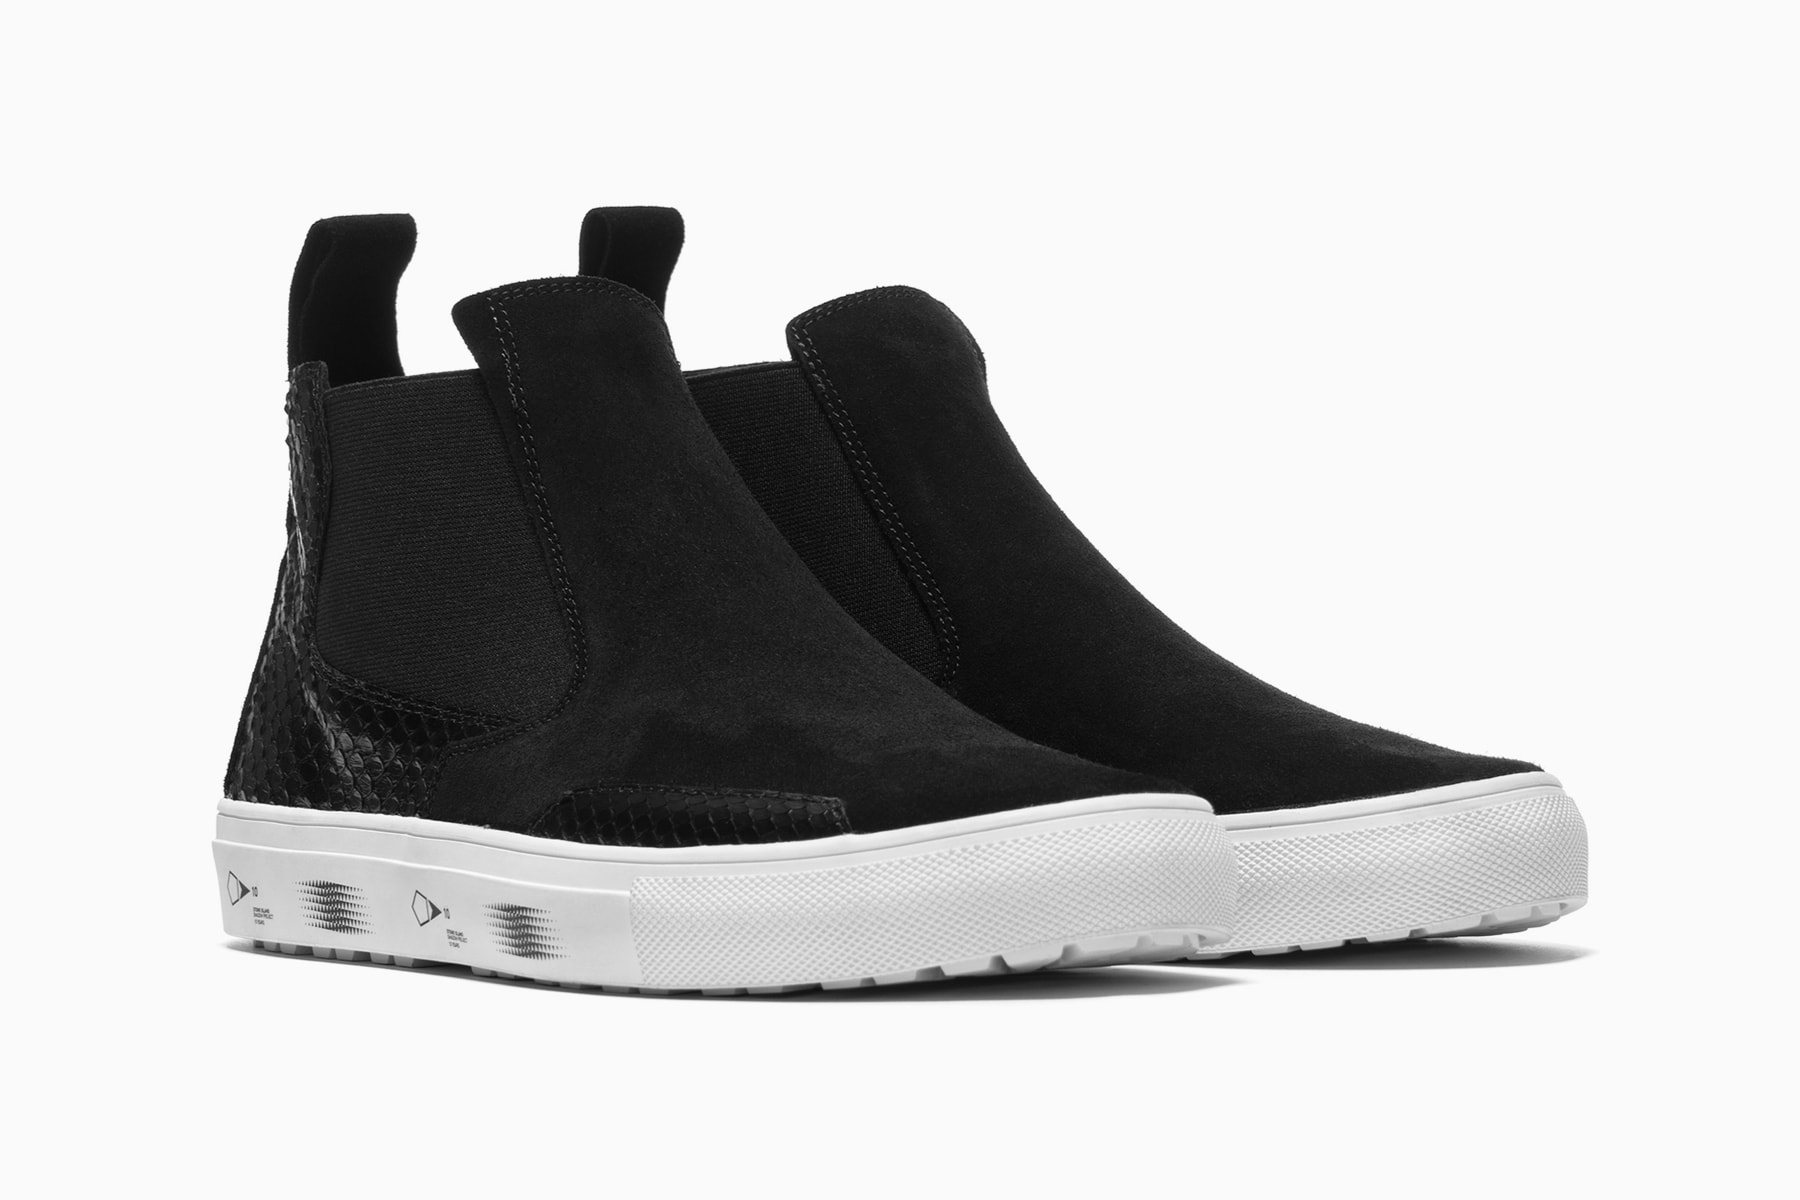 Stone Island Shadow Project 10 Year Anniversary Slip on boot Black Suede Snakeskin